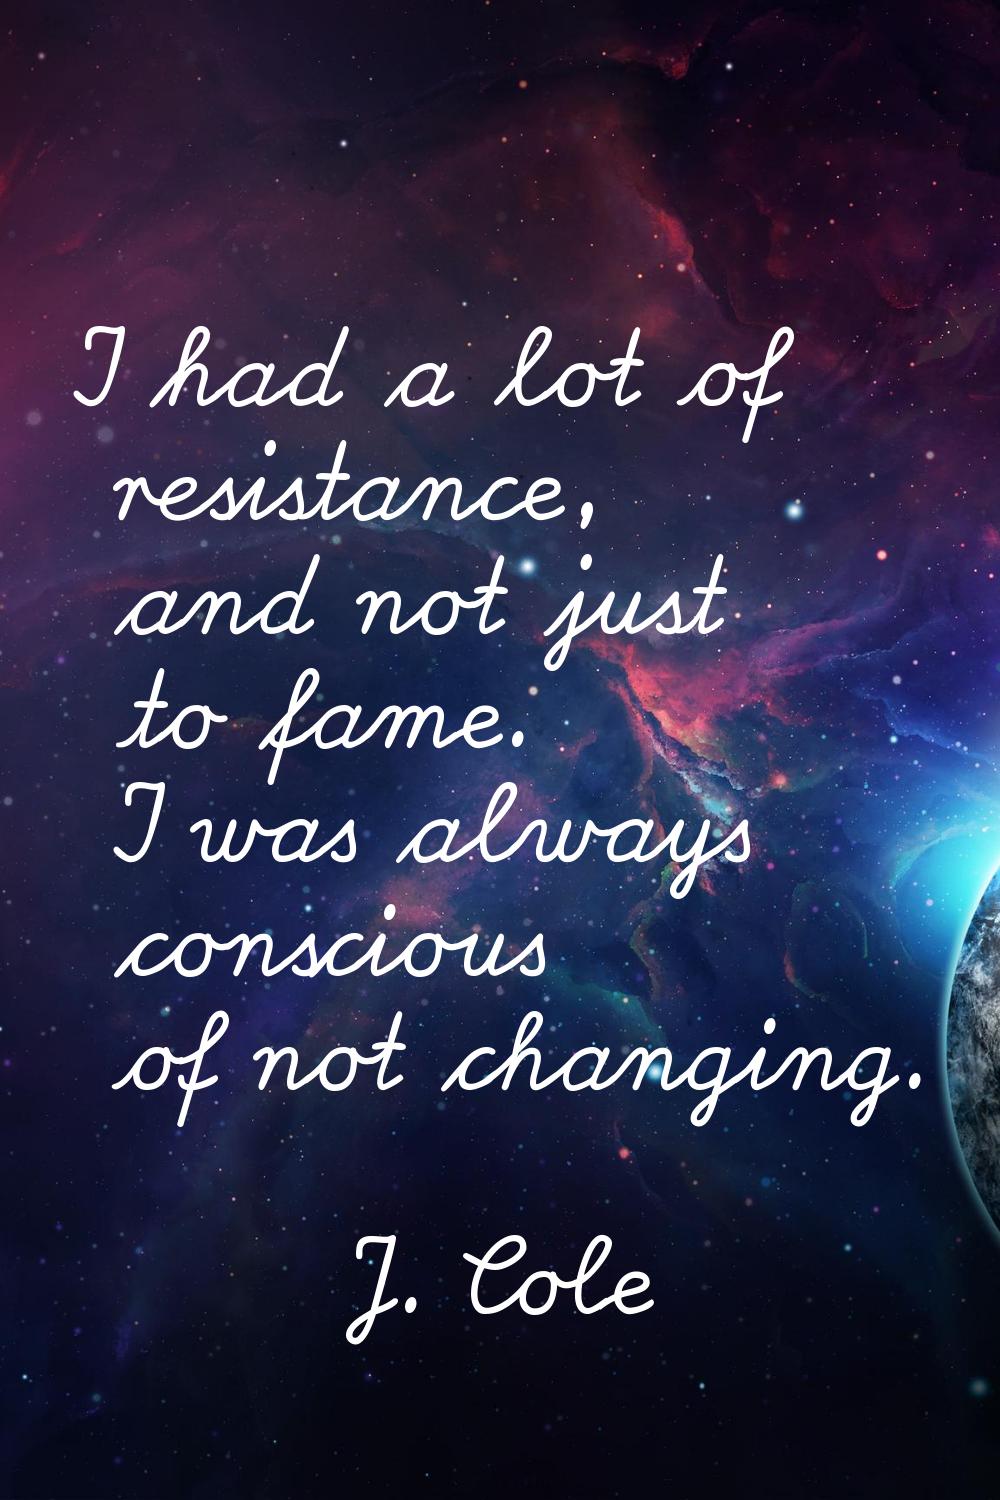 I had a lot of resistance, and not just to fame. I was always conscious of not changing.